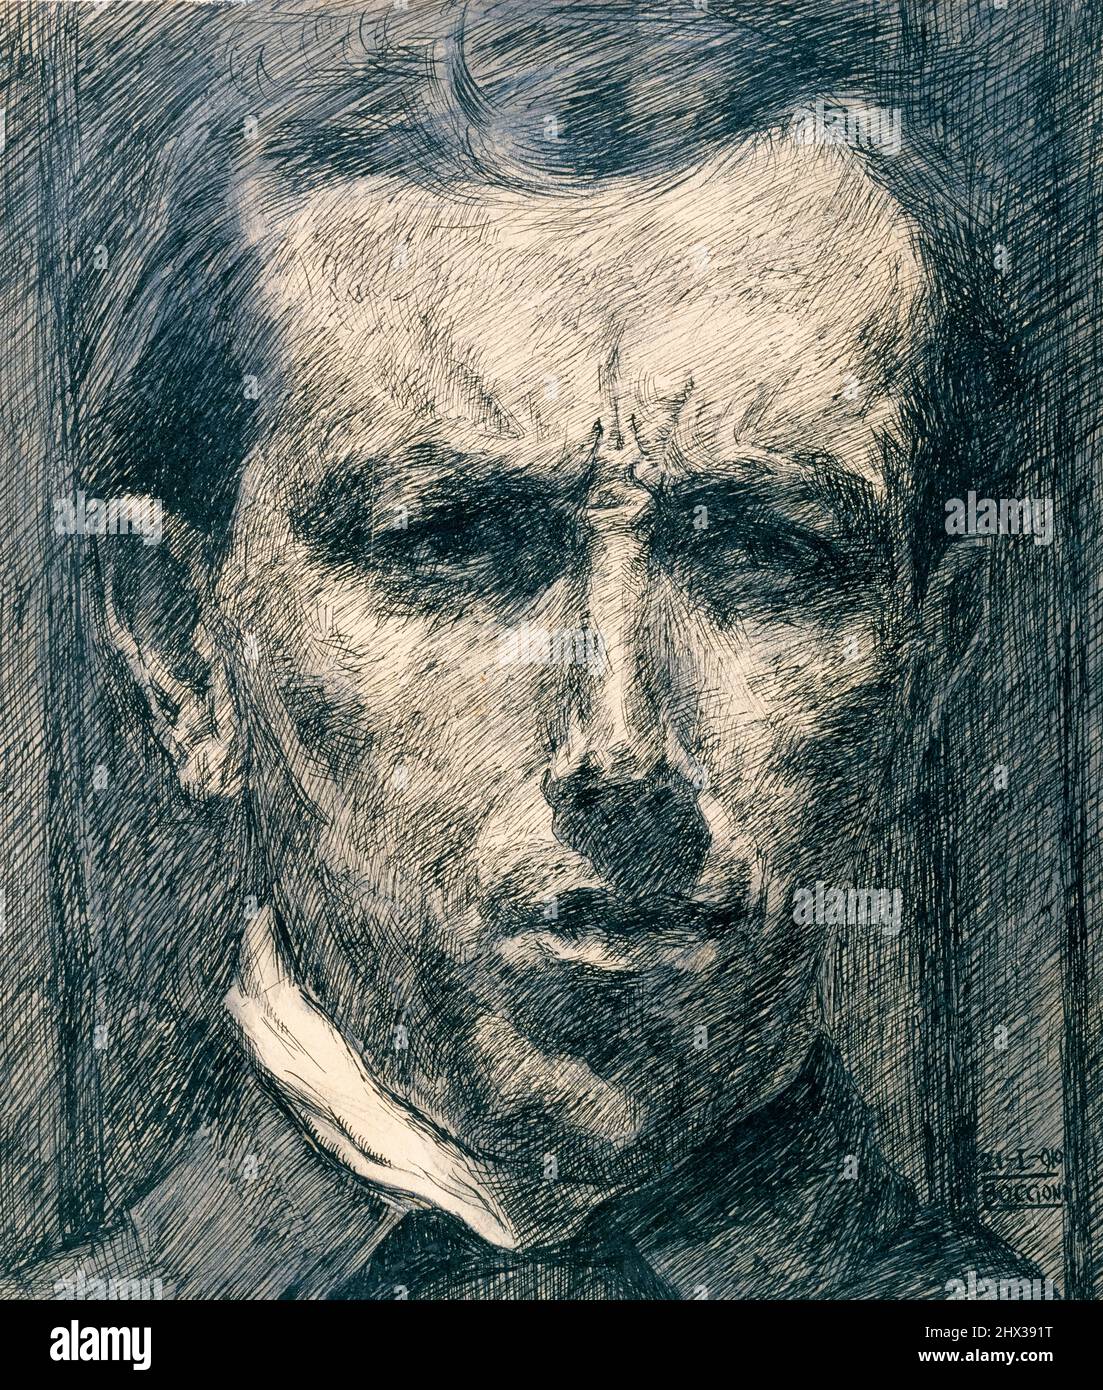 Umberto Boccioni (1882-1916) Self Portrait of the Italian futurist painter and sculptor, drawing in ink with wash and graphite on paper, 1910 Stock Photo